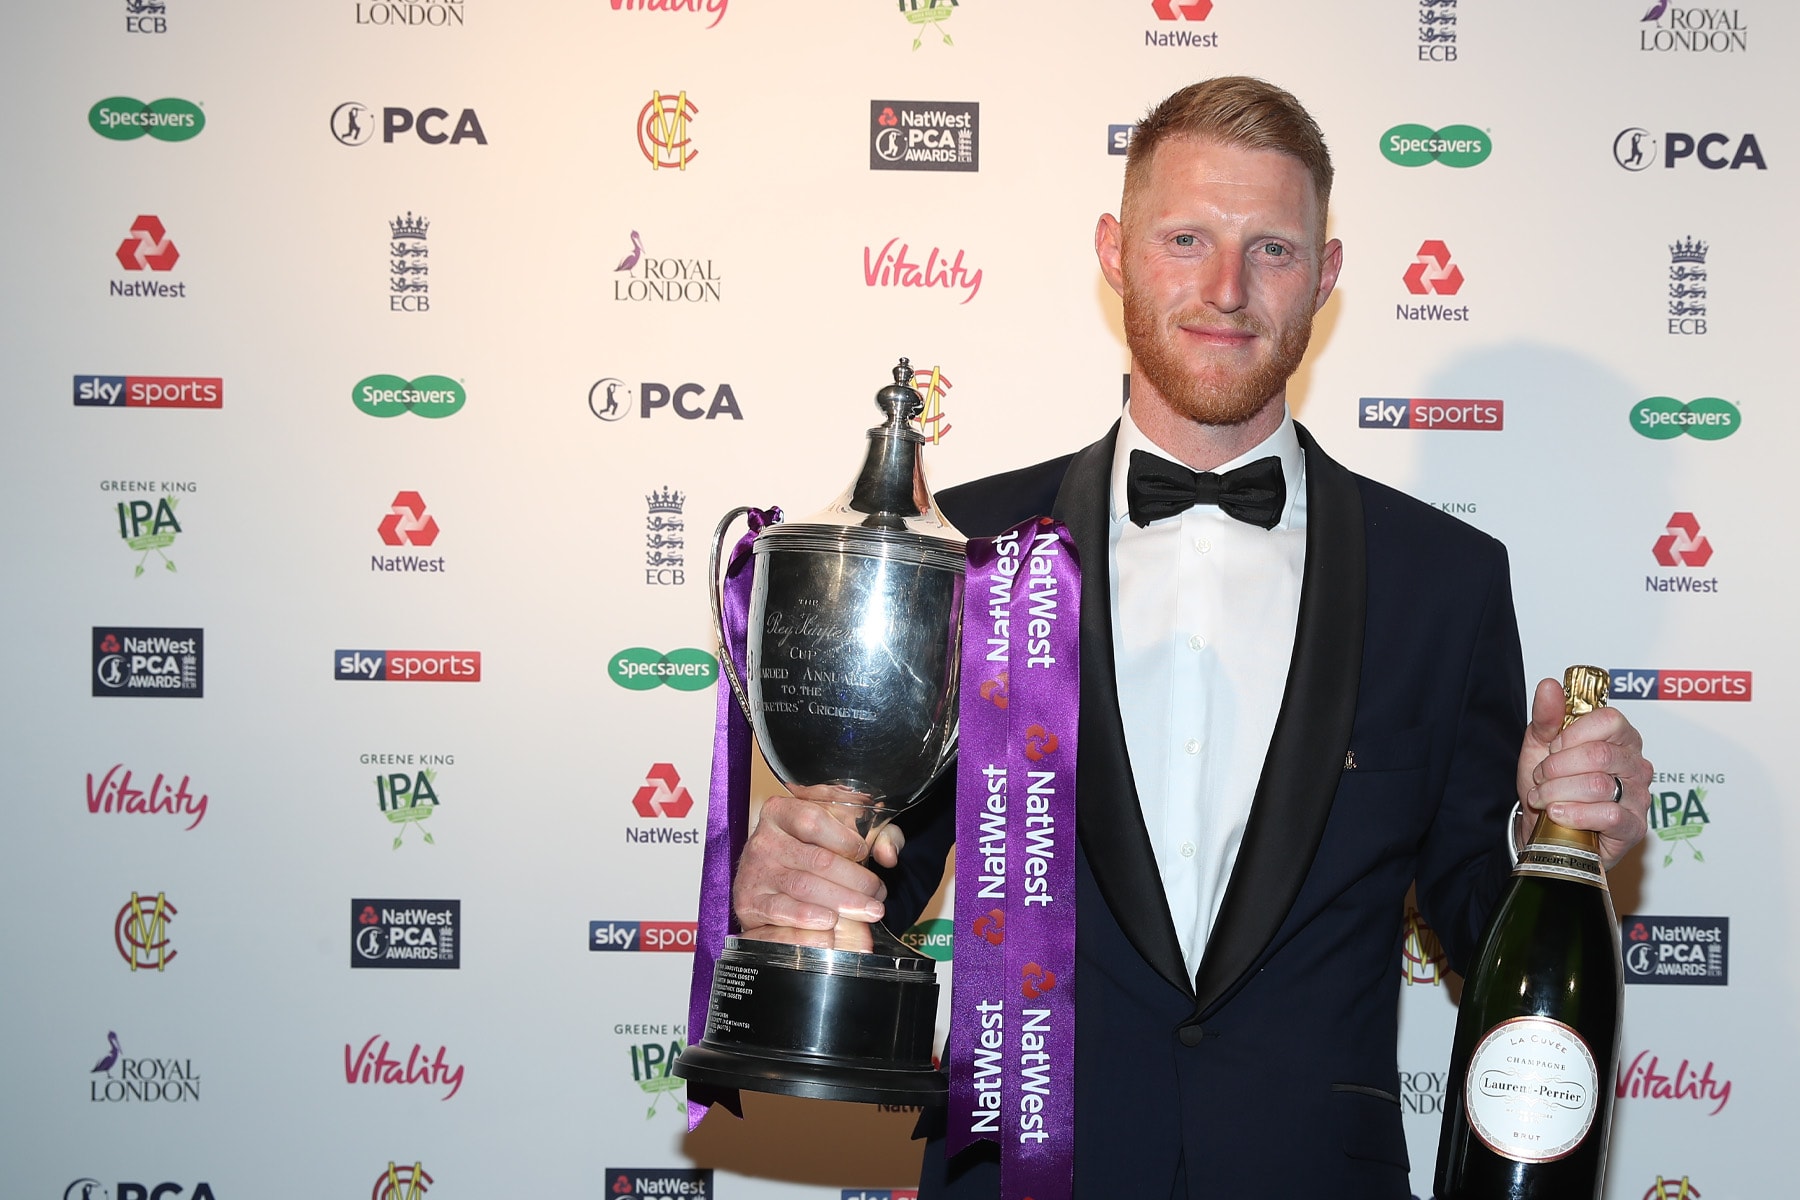 Watch the NatWest Cricket Awards live on Sky